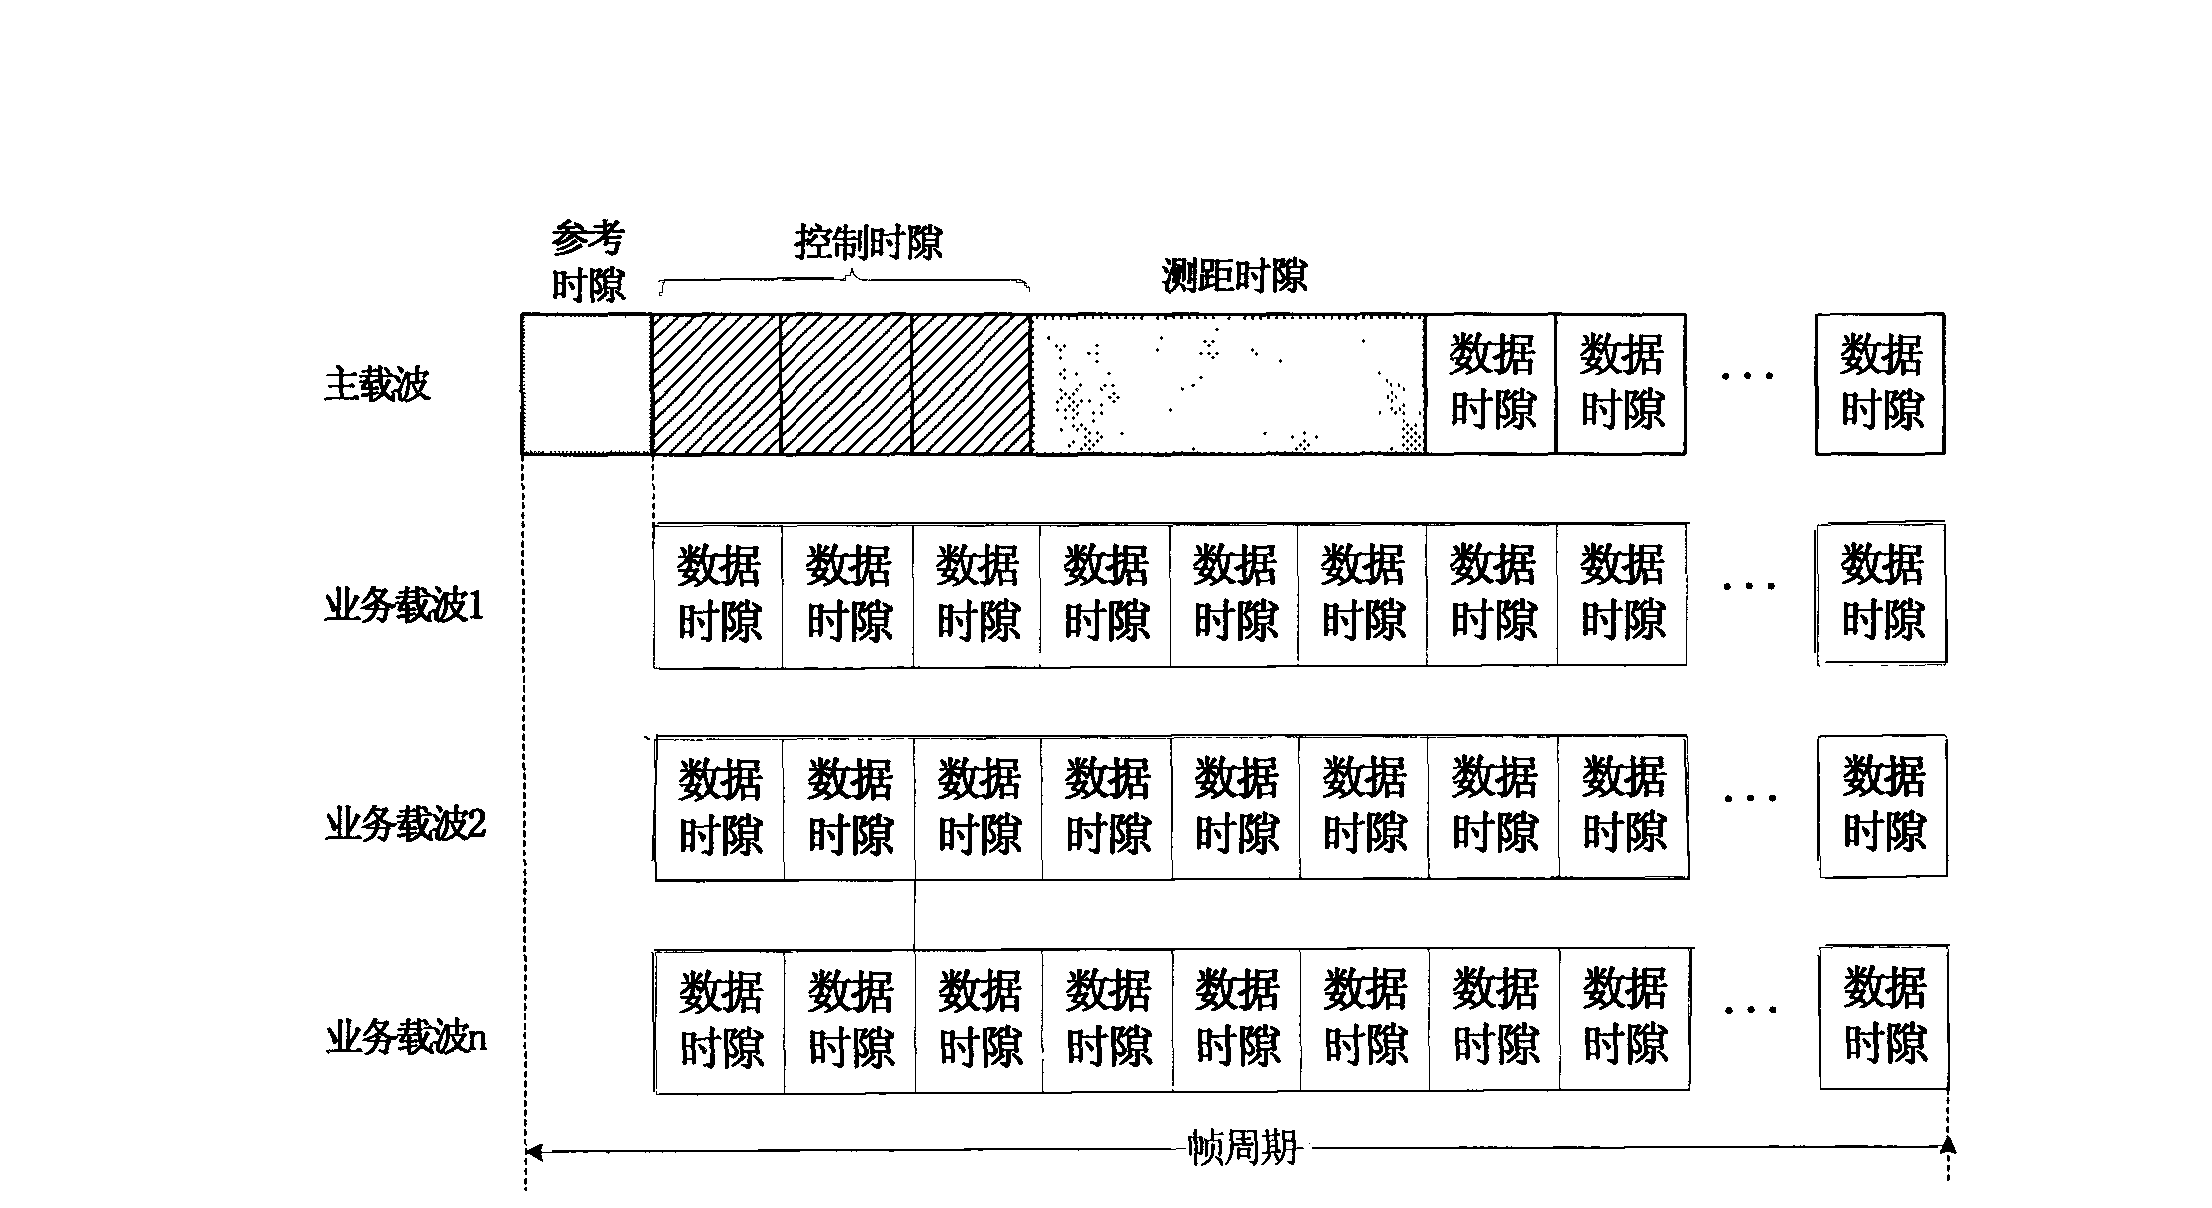 Compound synchronization control method of multi-frequency time division multiple access satellite communication system